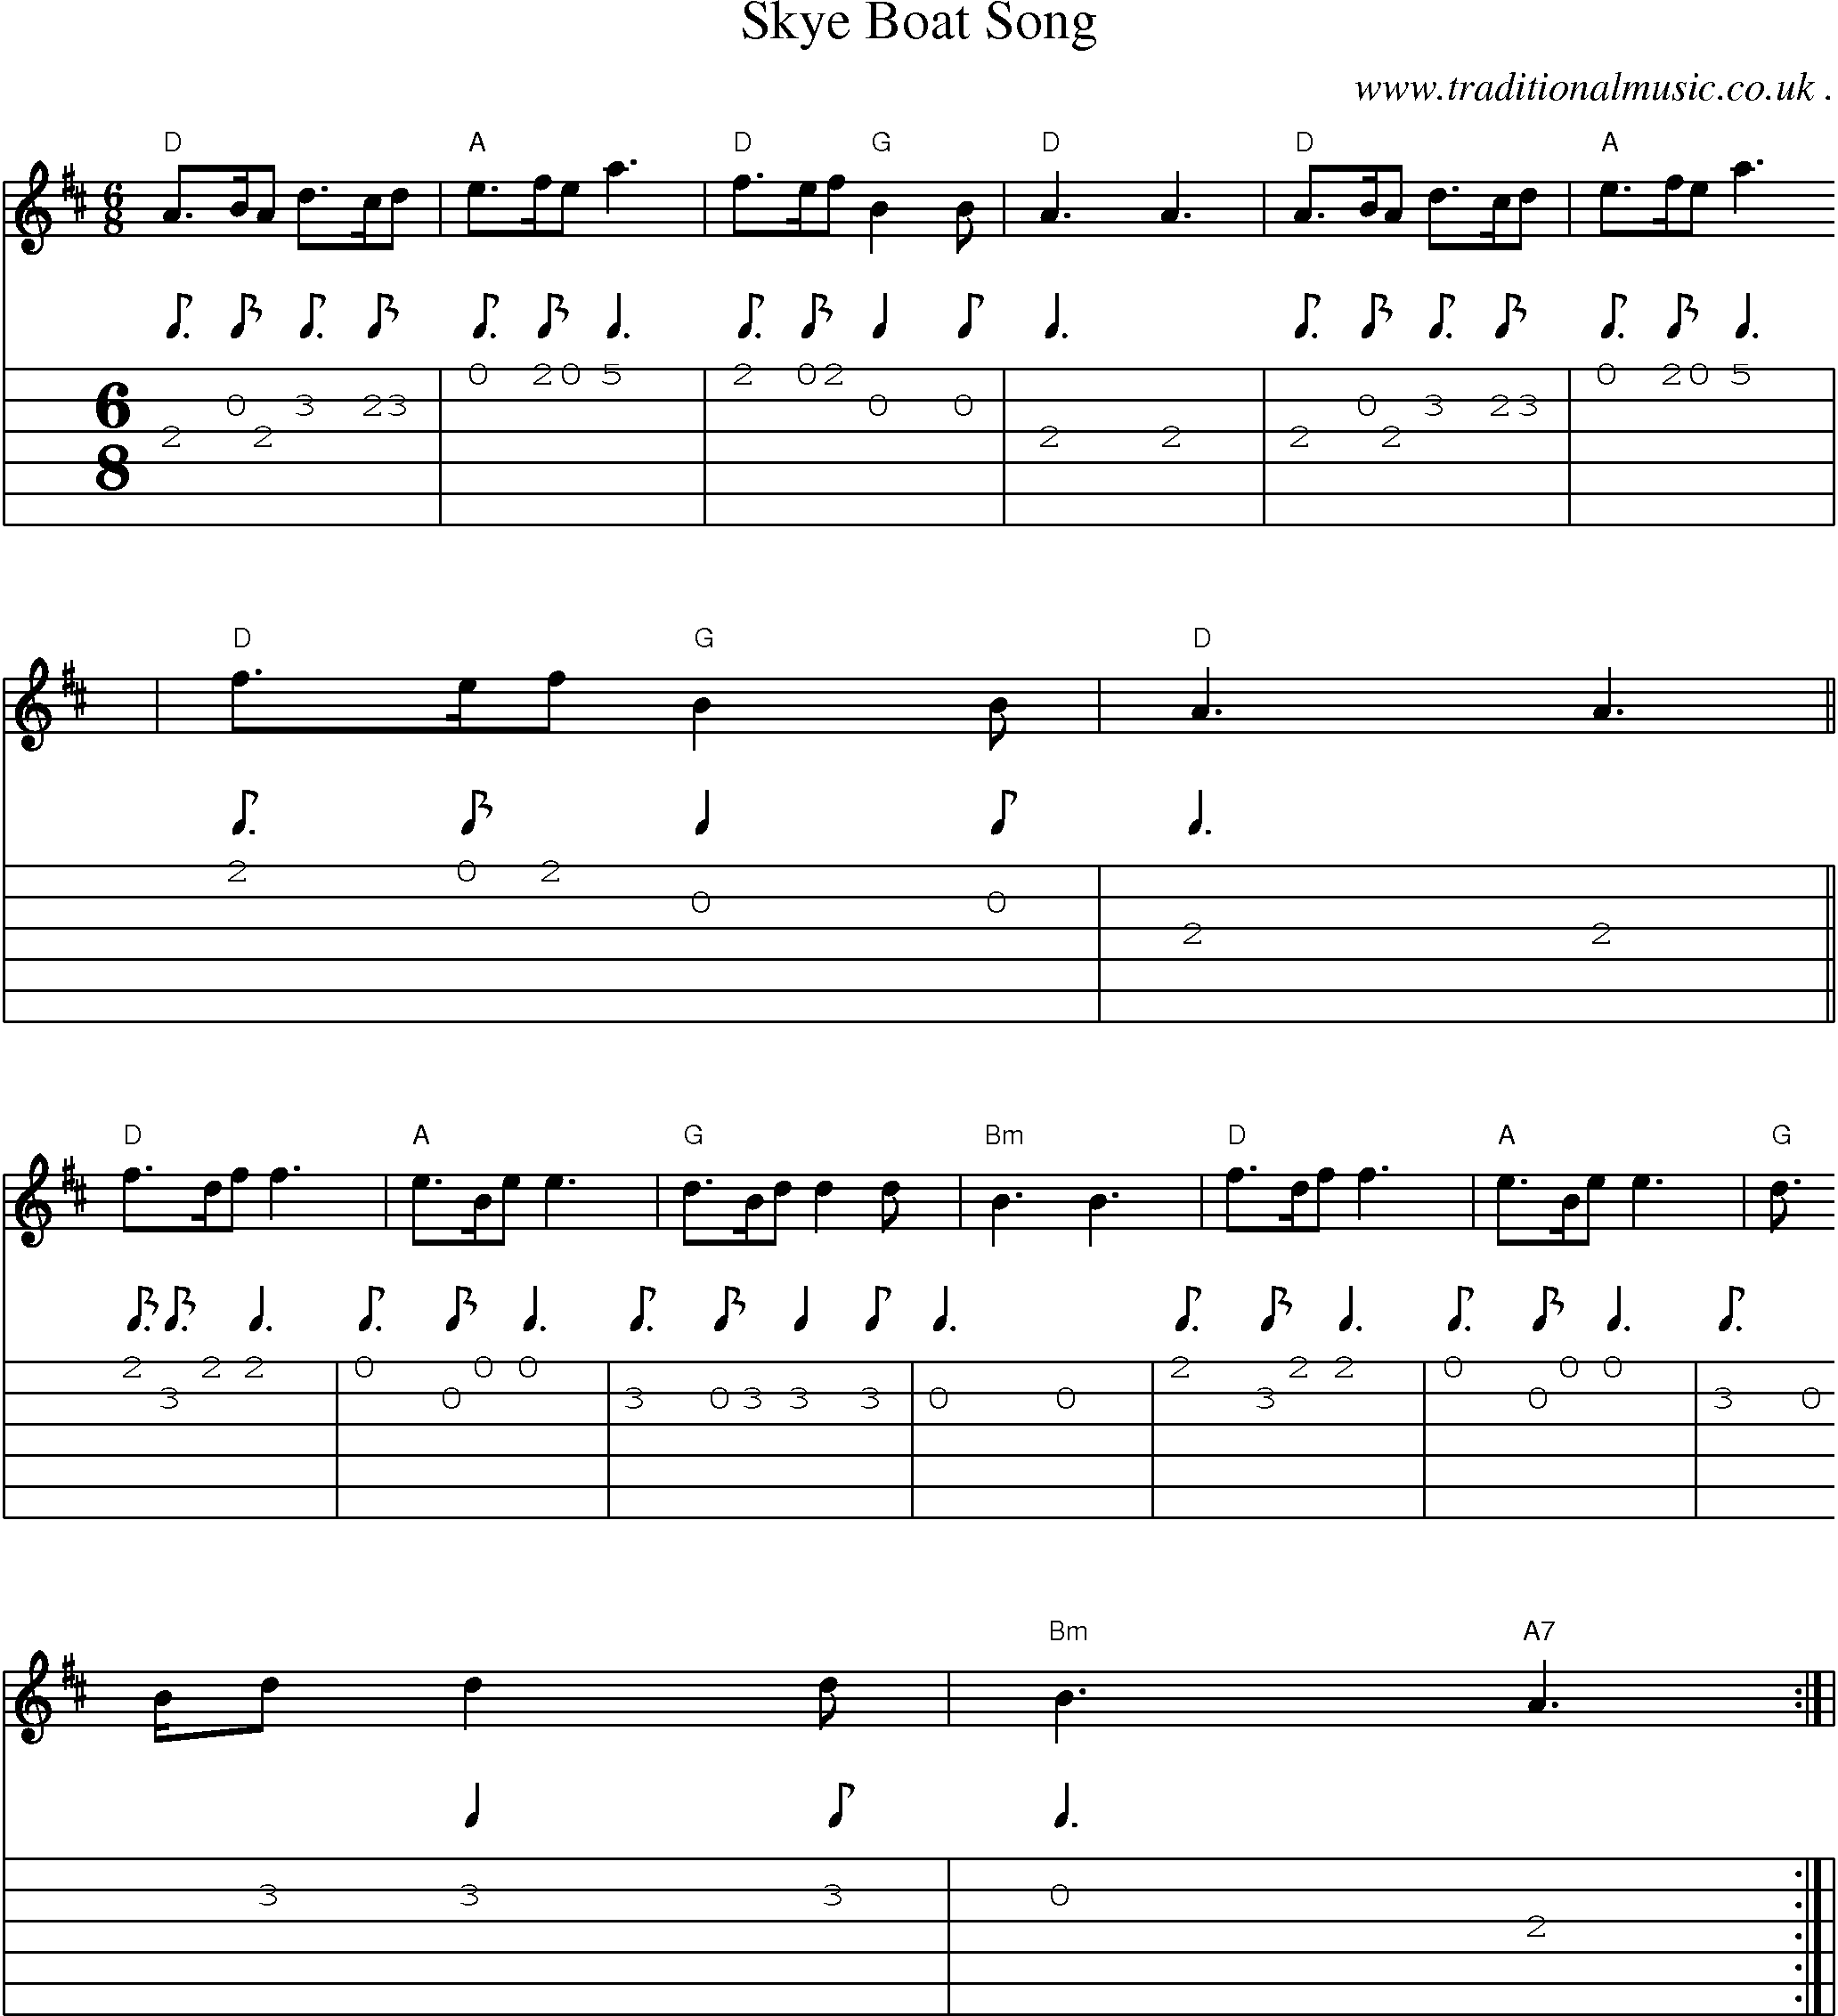 Sheet-Music and Guitar Tabs for Skye Boat Song